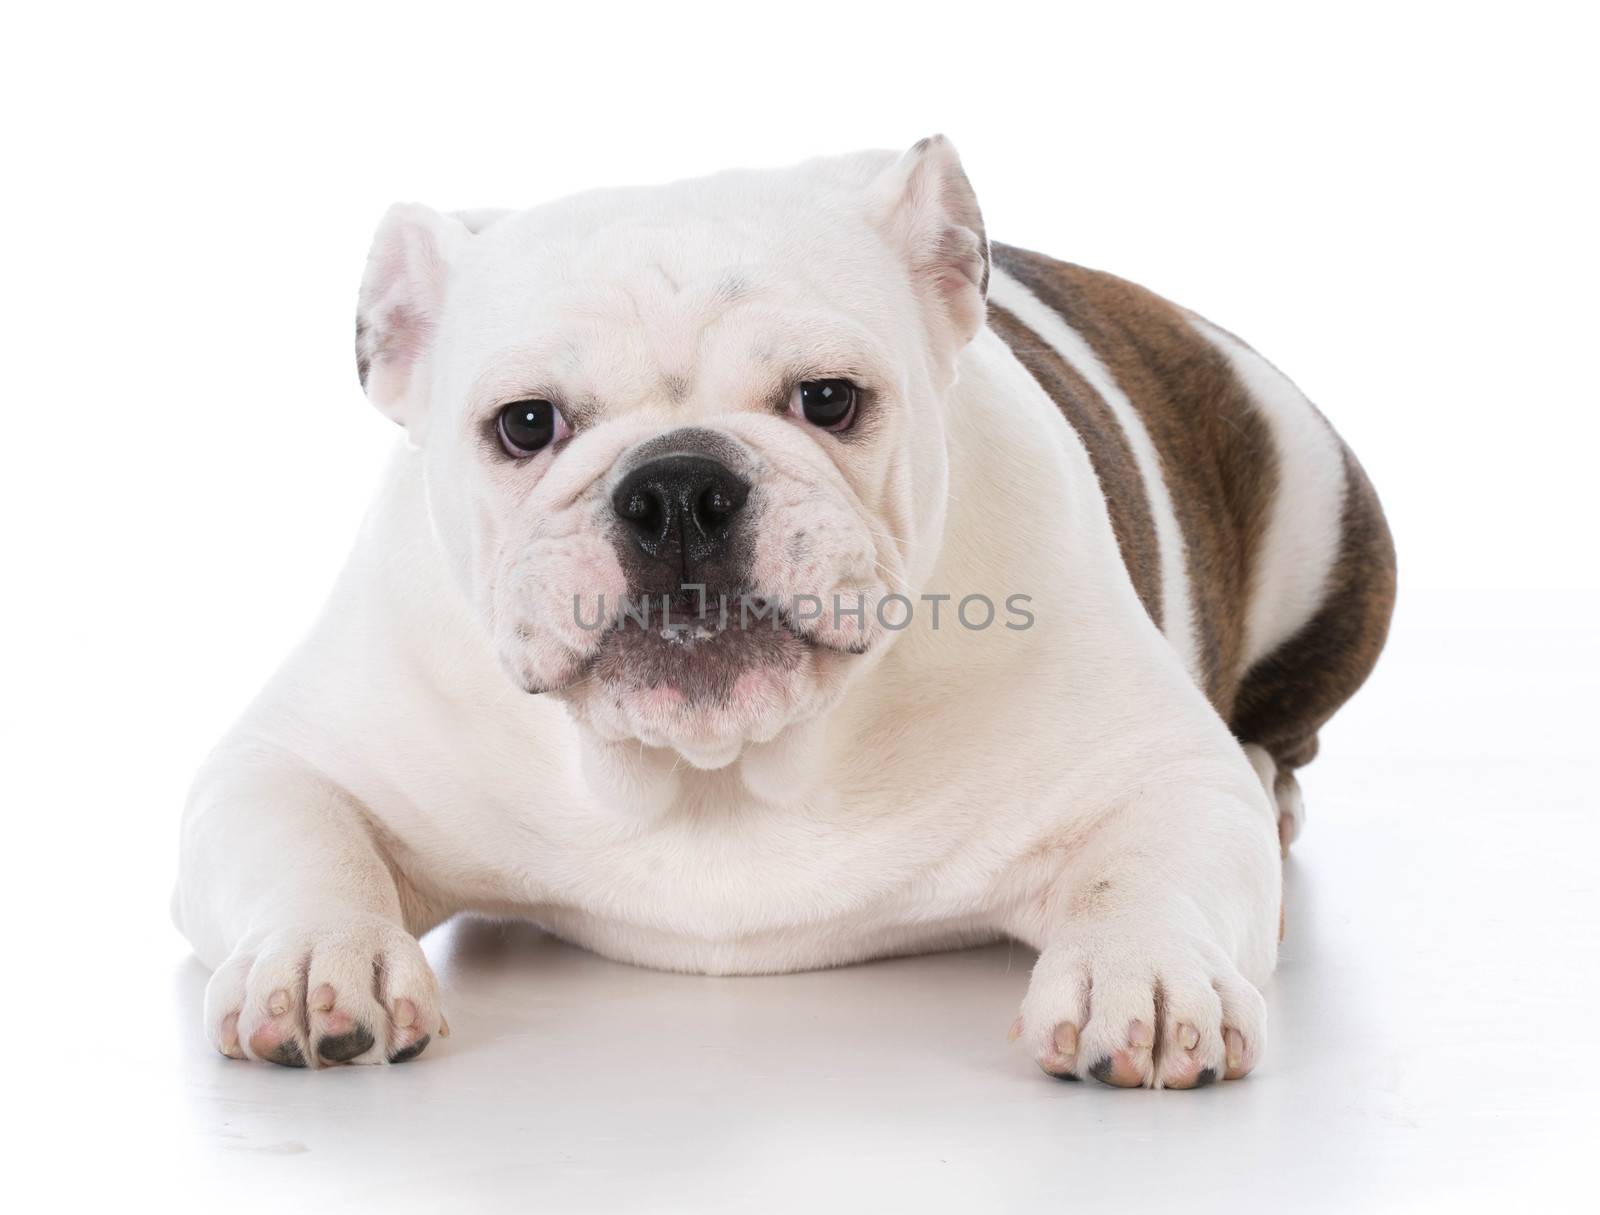 bulldog puppy with adorable expression on white background